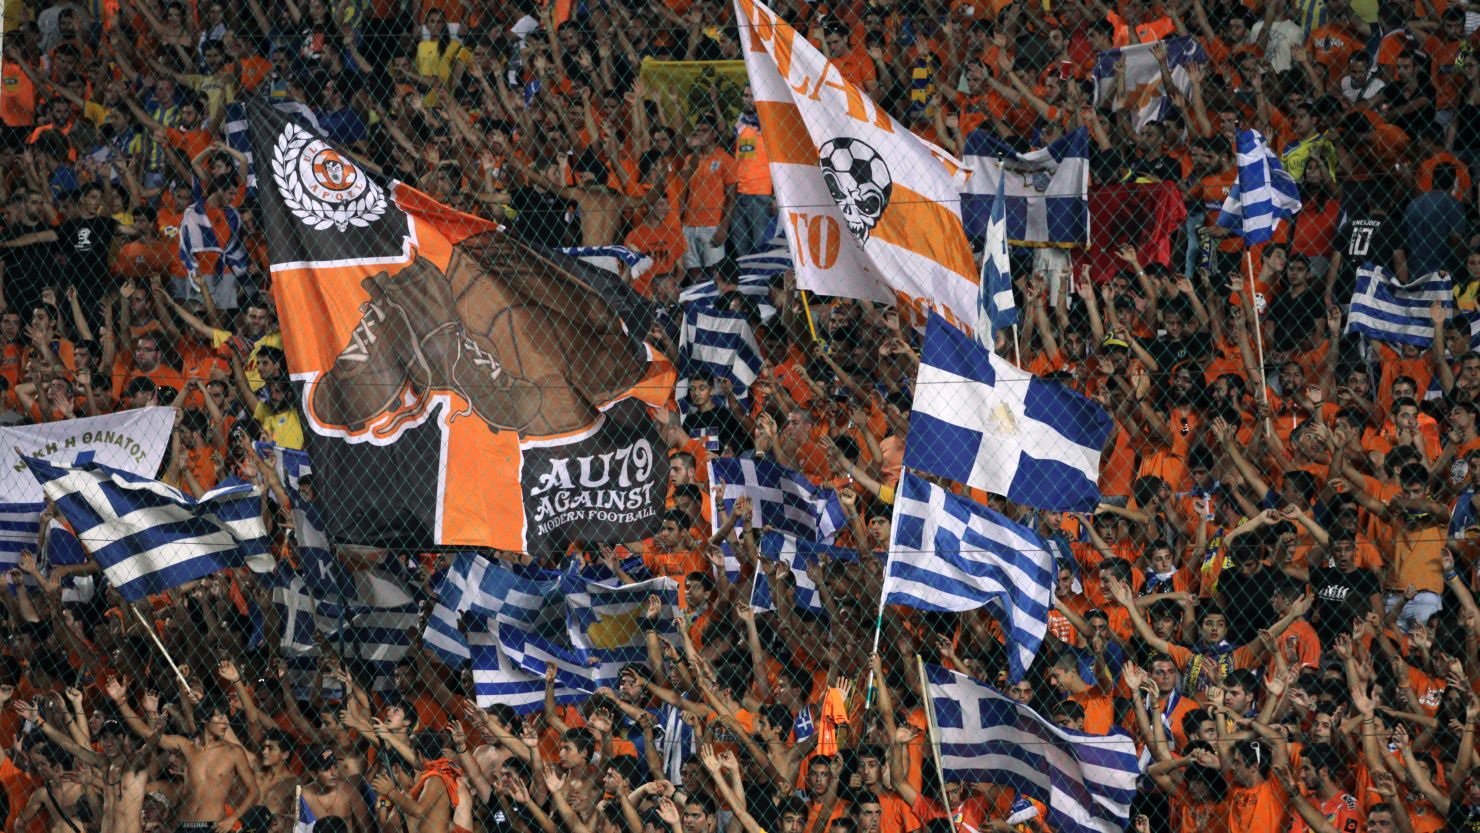 APOEL Nicosia fans will be watching Europa League football at the club's GSP Stadium.